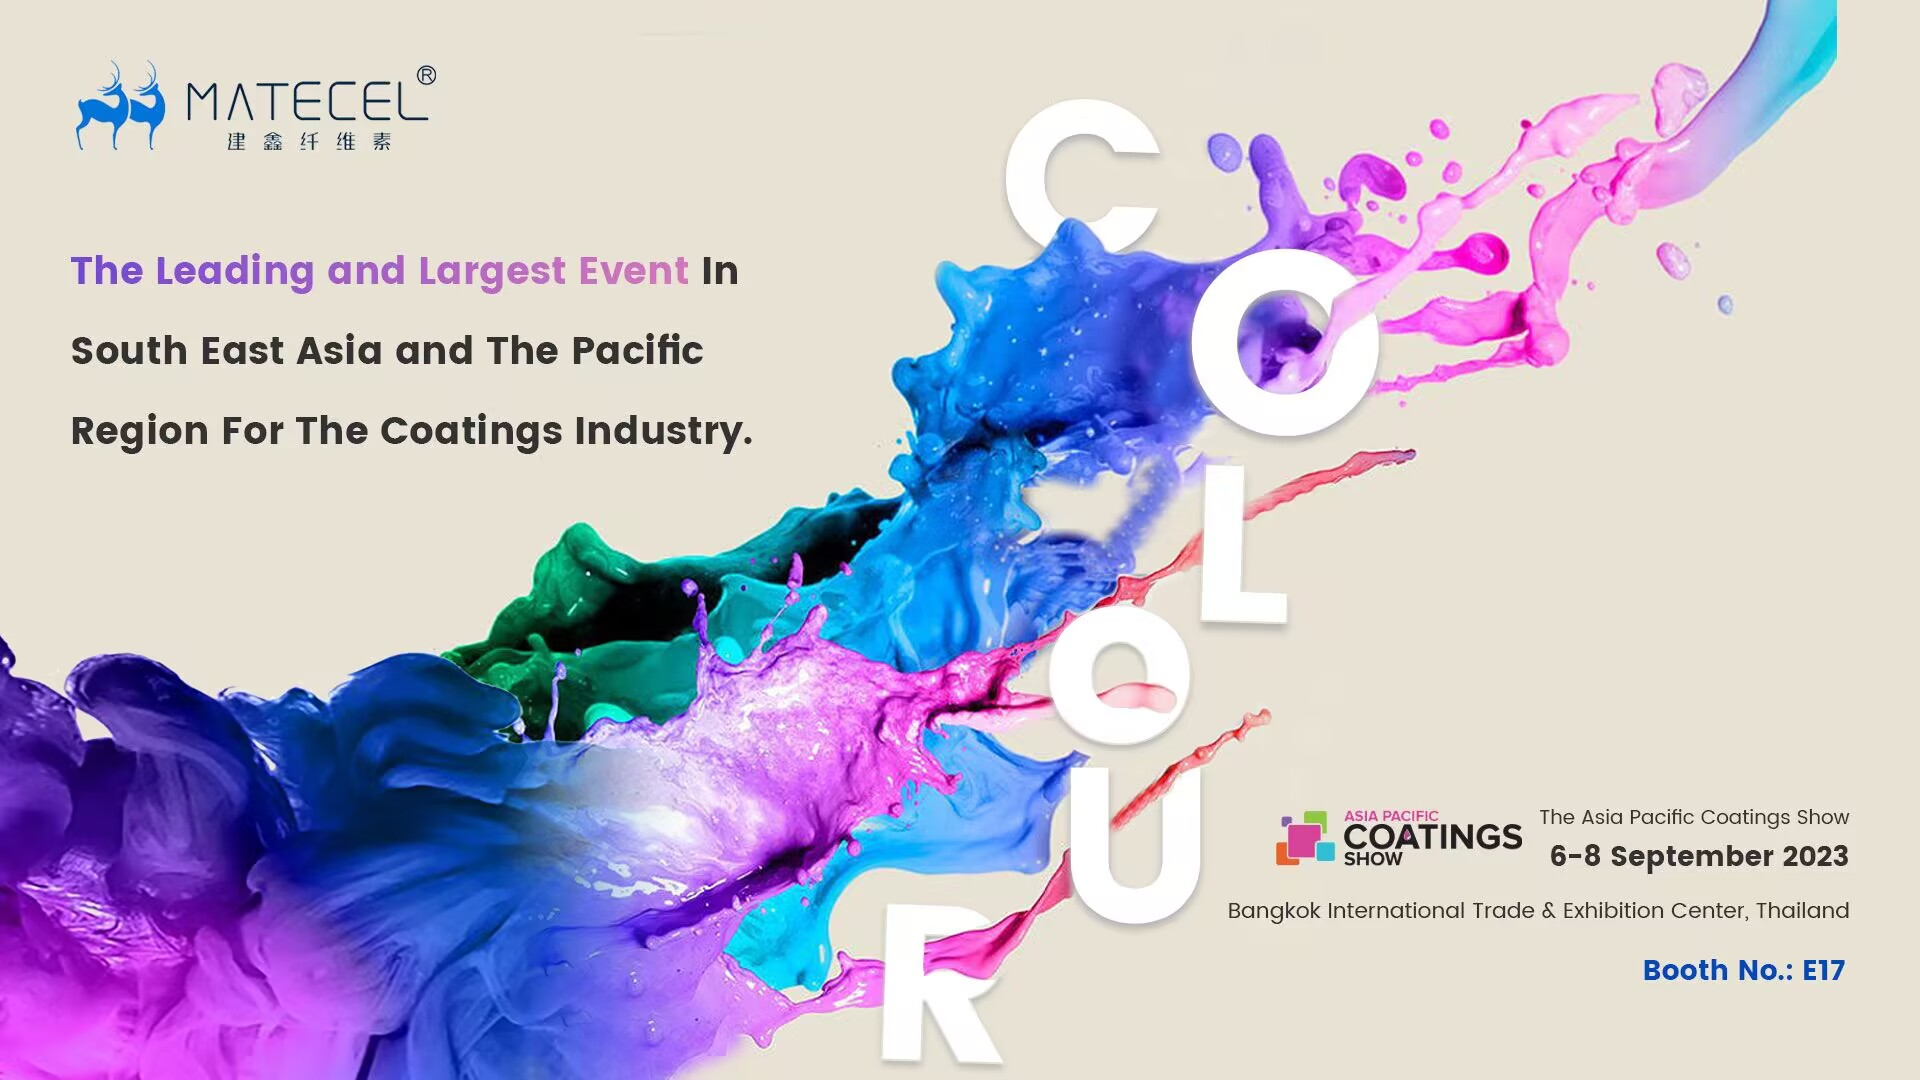 Poised to Ignite Innovation at the Asia Pacific Coating Show 2023